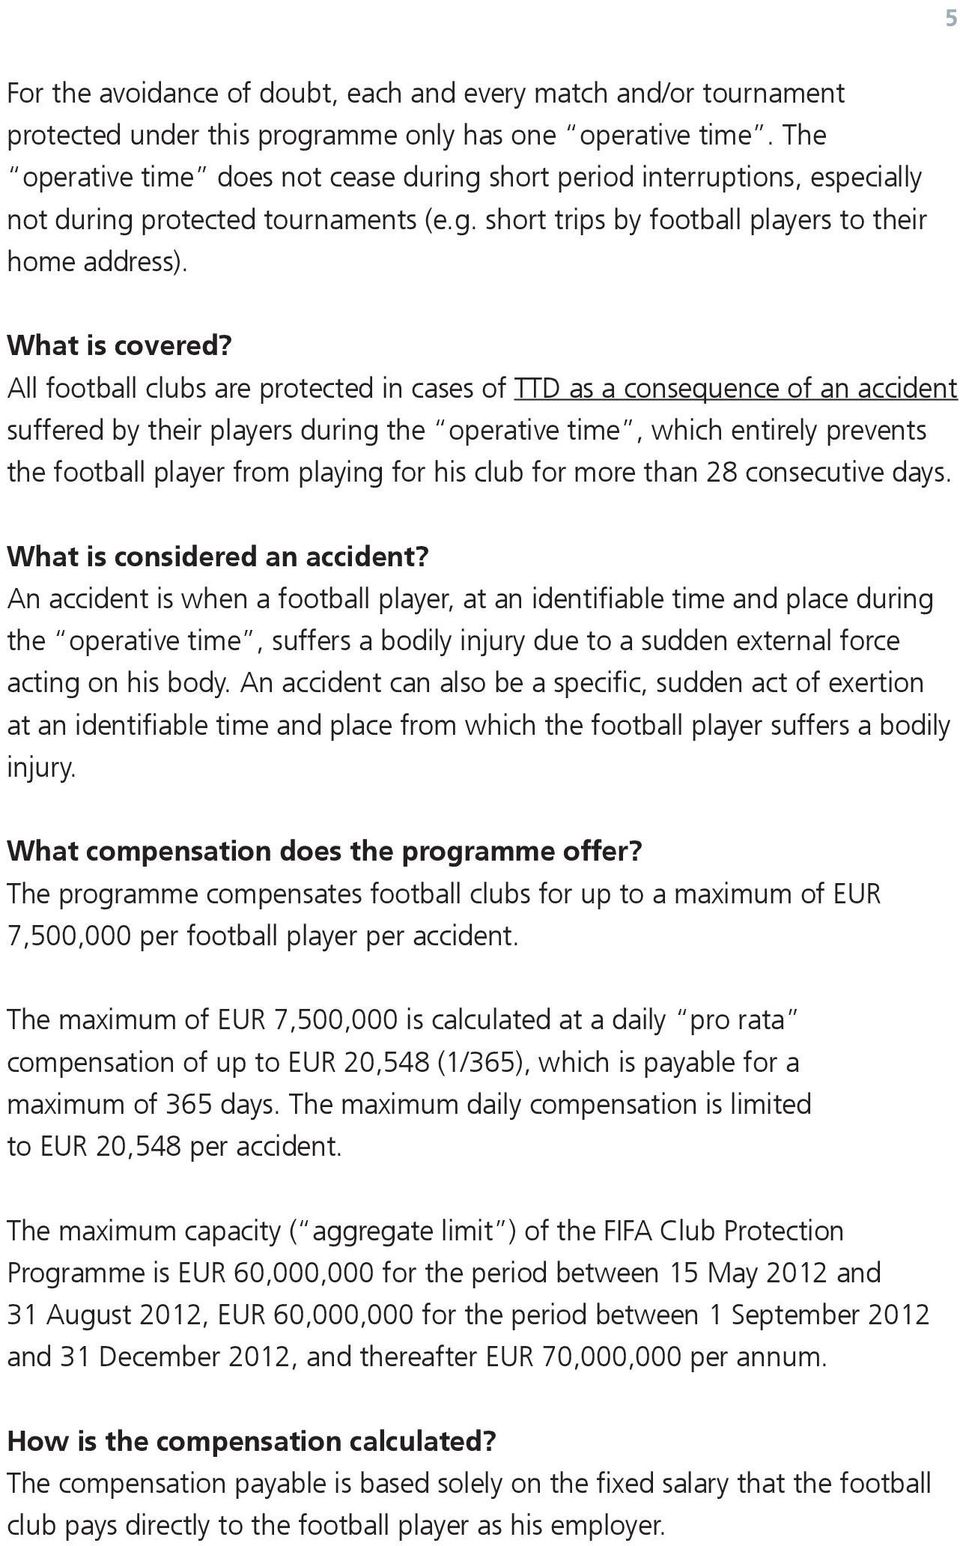 All football clubs are protected in cases TTD as a consequence an accident suffered by ir players during operative time, which entirely prevents football player from playing for his club for more